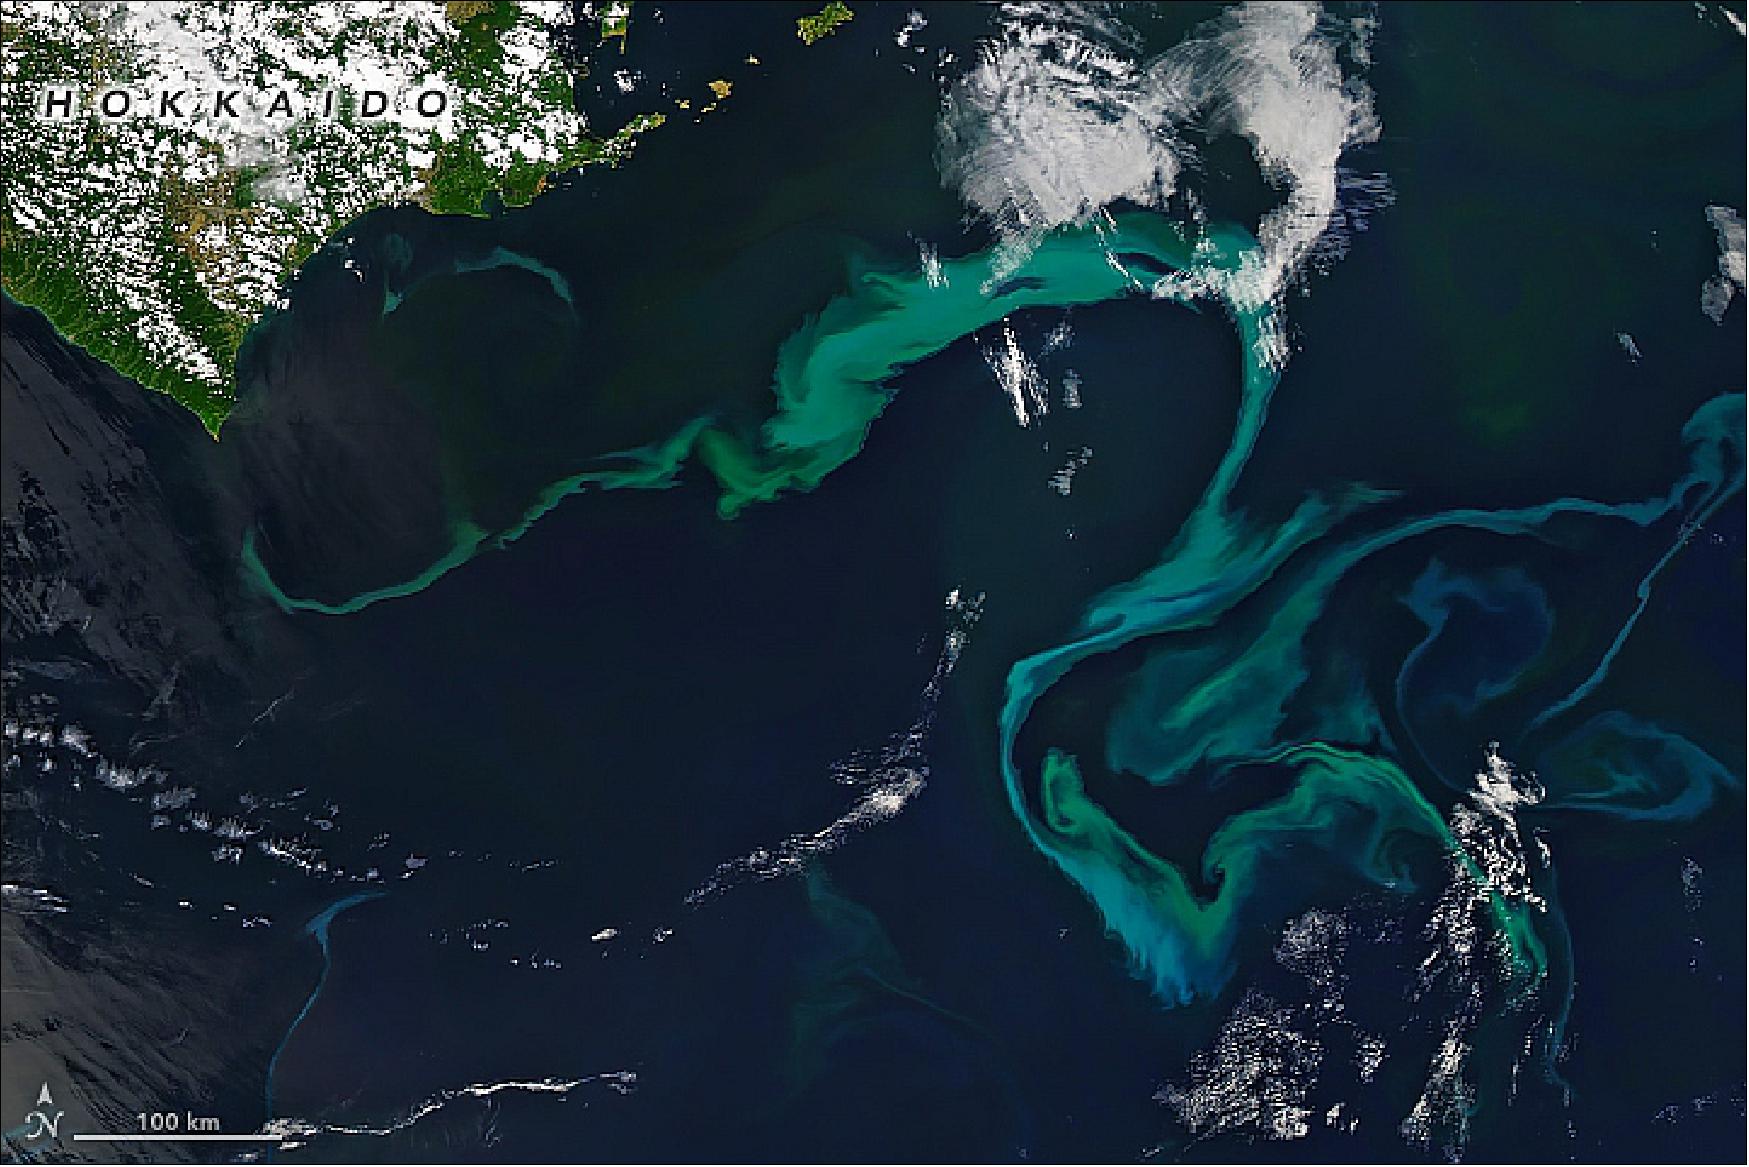 Figure 31: Off the coast of Hokkaido, Japan, there was a lot of primary production going on in late May and early June 2019. On June 2, the MODIS instrument on NASA’s Aqua satellite caught glimpses of vast blooms of phytoplankton. Their green and light blue tones traced the edges of swirling water masses, currents, and eddies (image credit: NASA Earth Observatory image by Joshua Stevens, using MODIS data from NASA EOSDIS/LANCE and GIBS/Worldview. Caption by Michael Carlowicz)